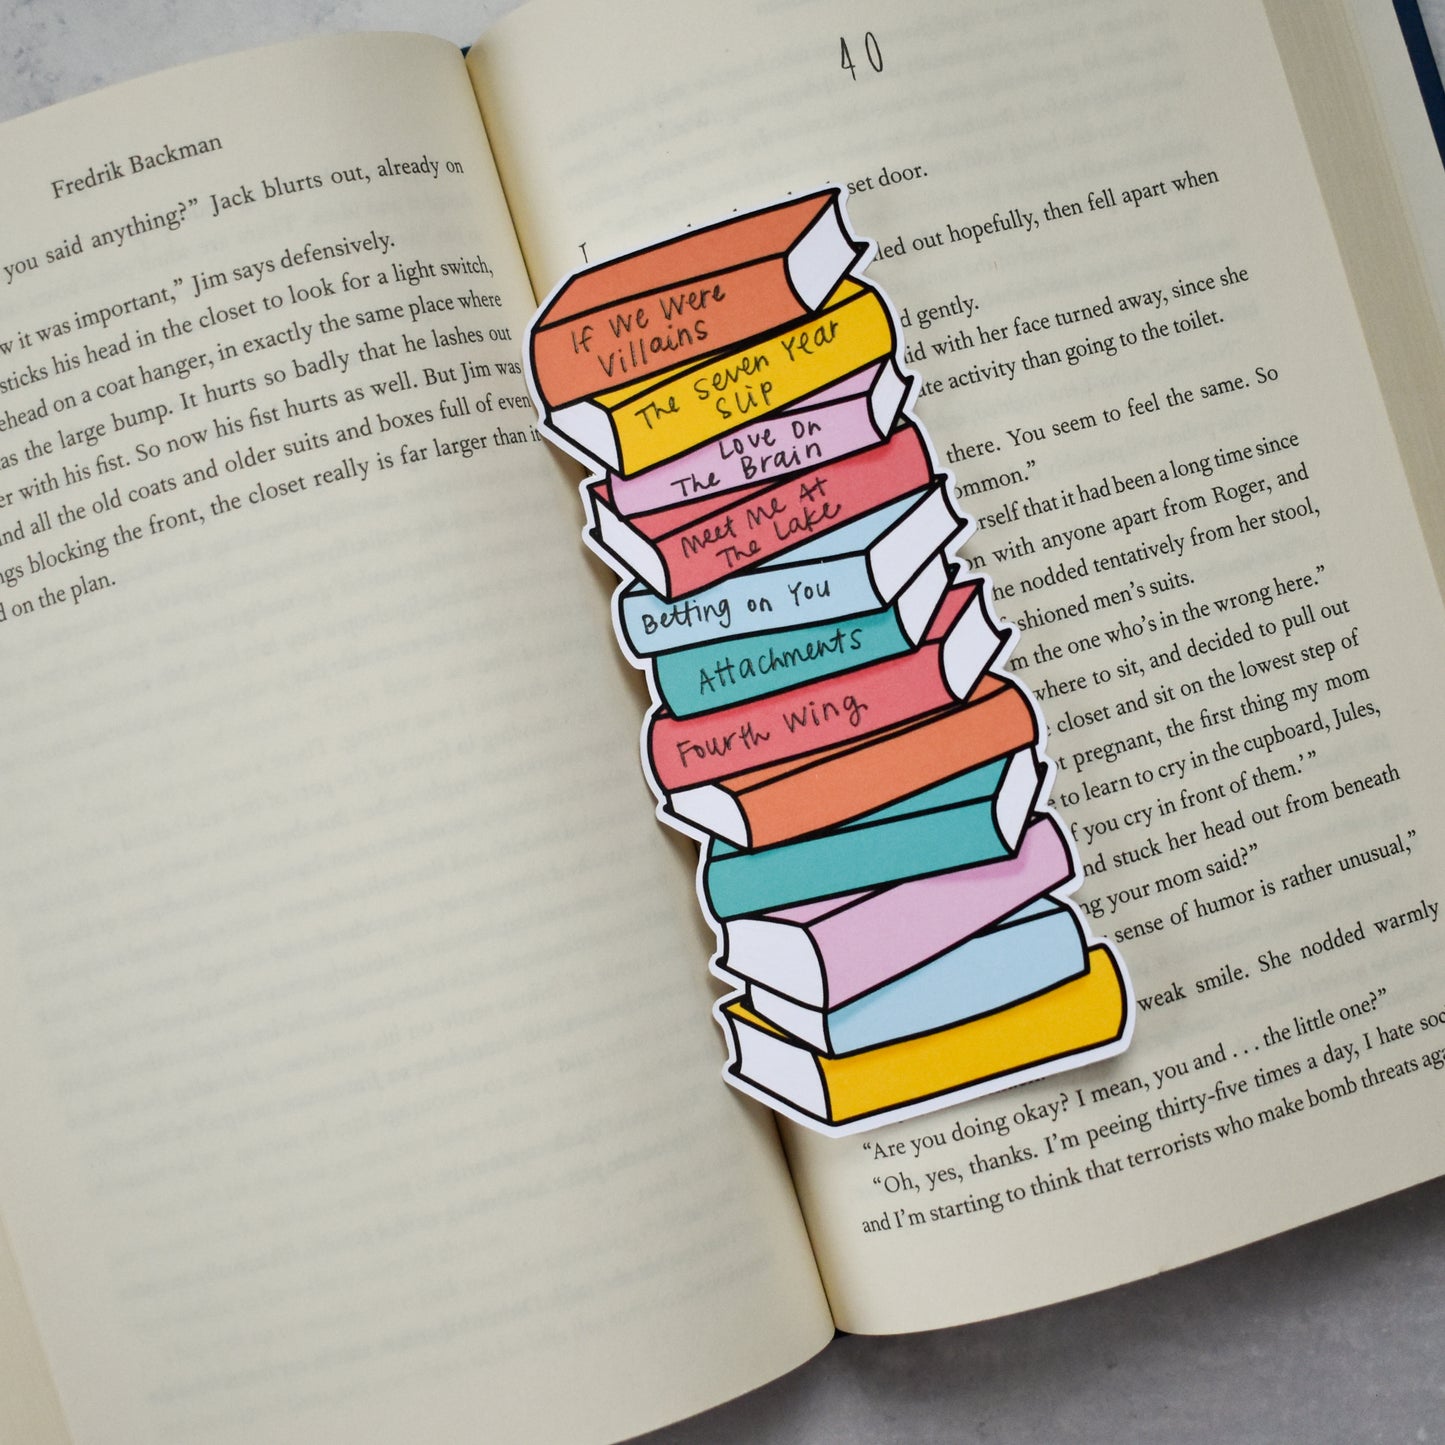 Book Stack Bookmark (Sunny Days)